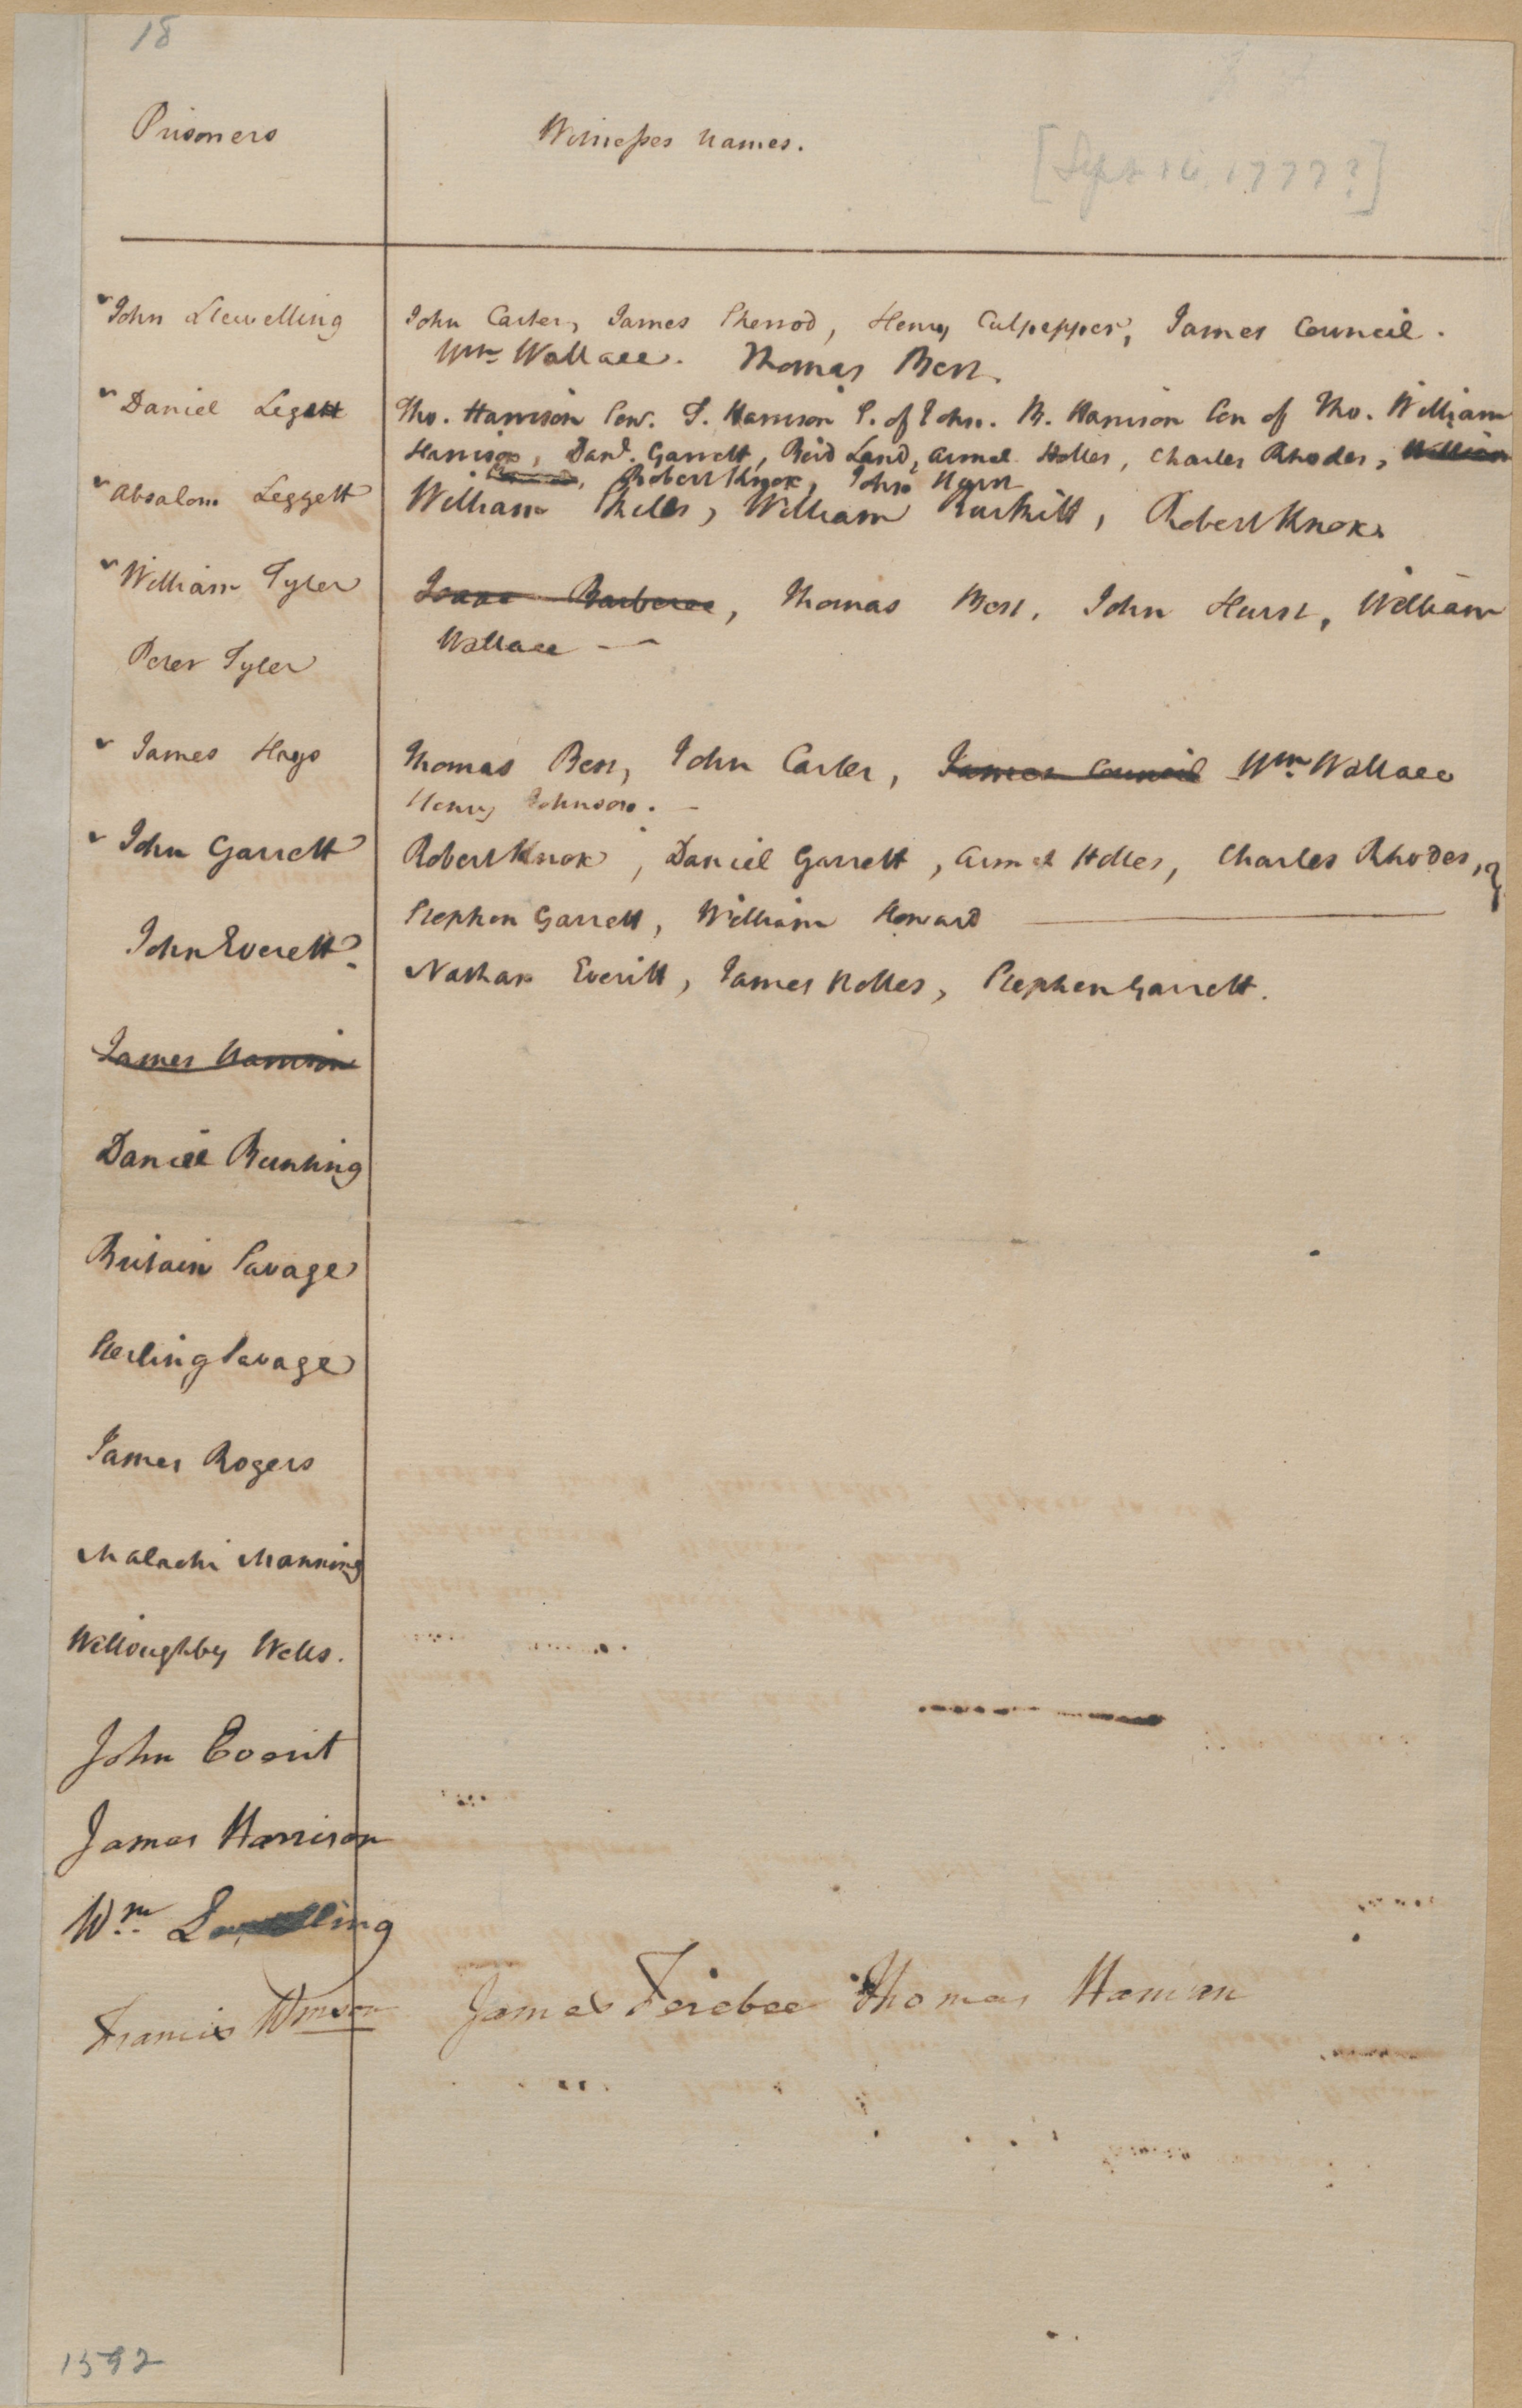 List of Prisoners Held at the Edenton District Court and the Witnesses Against Them, circa 16 September 1777, page 1